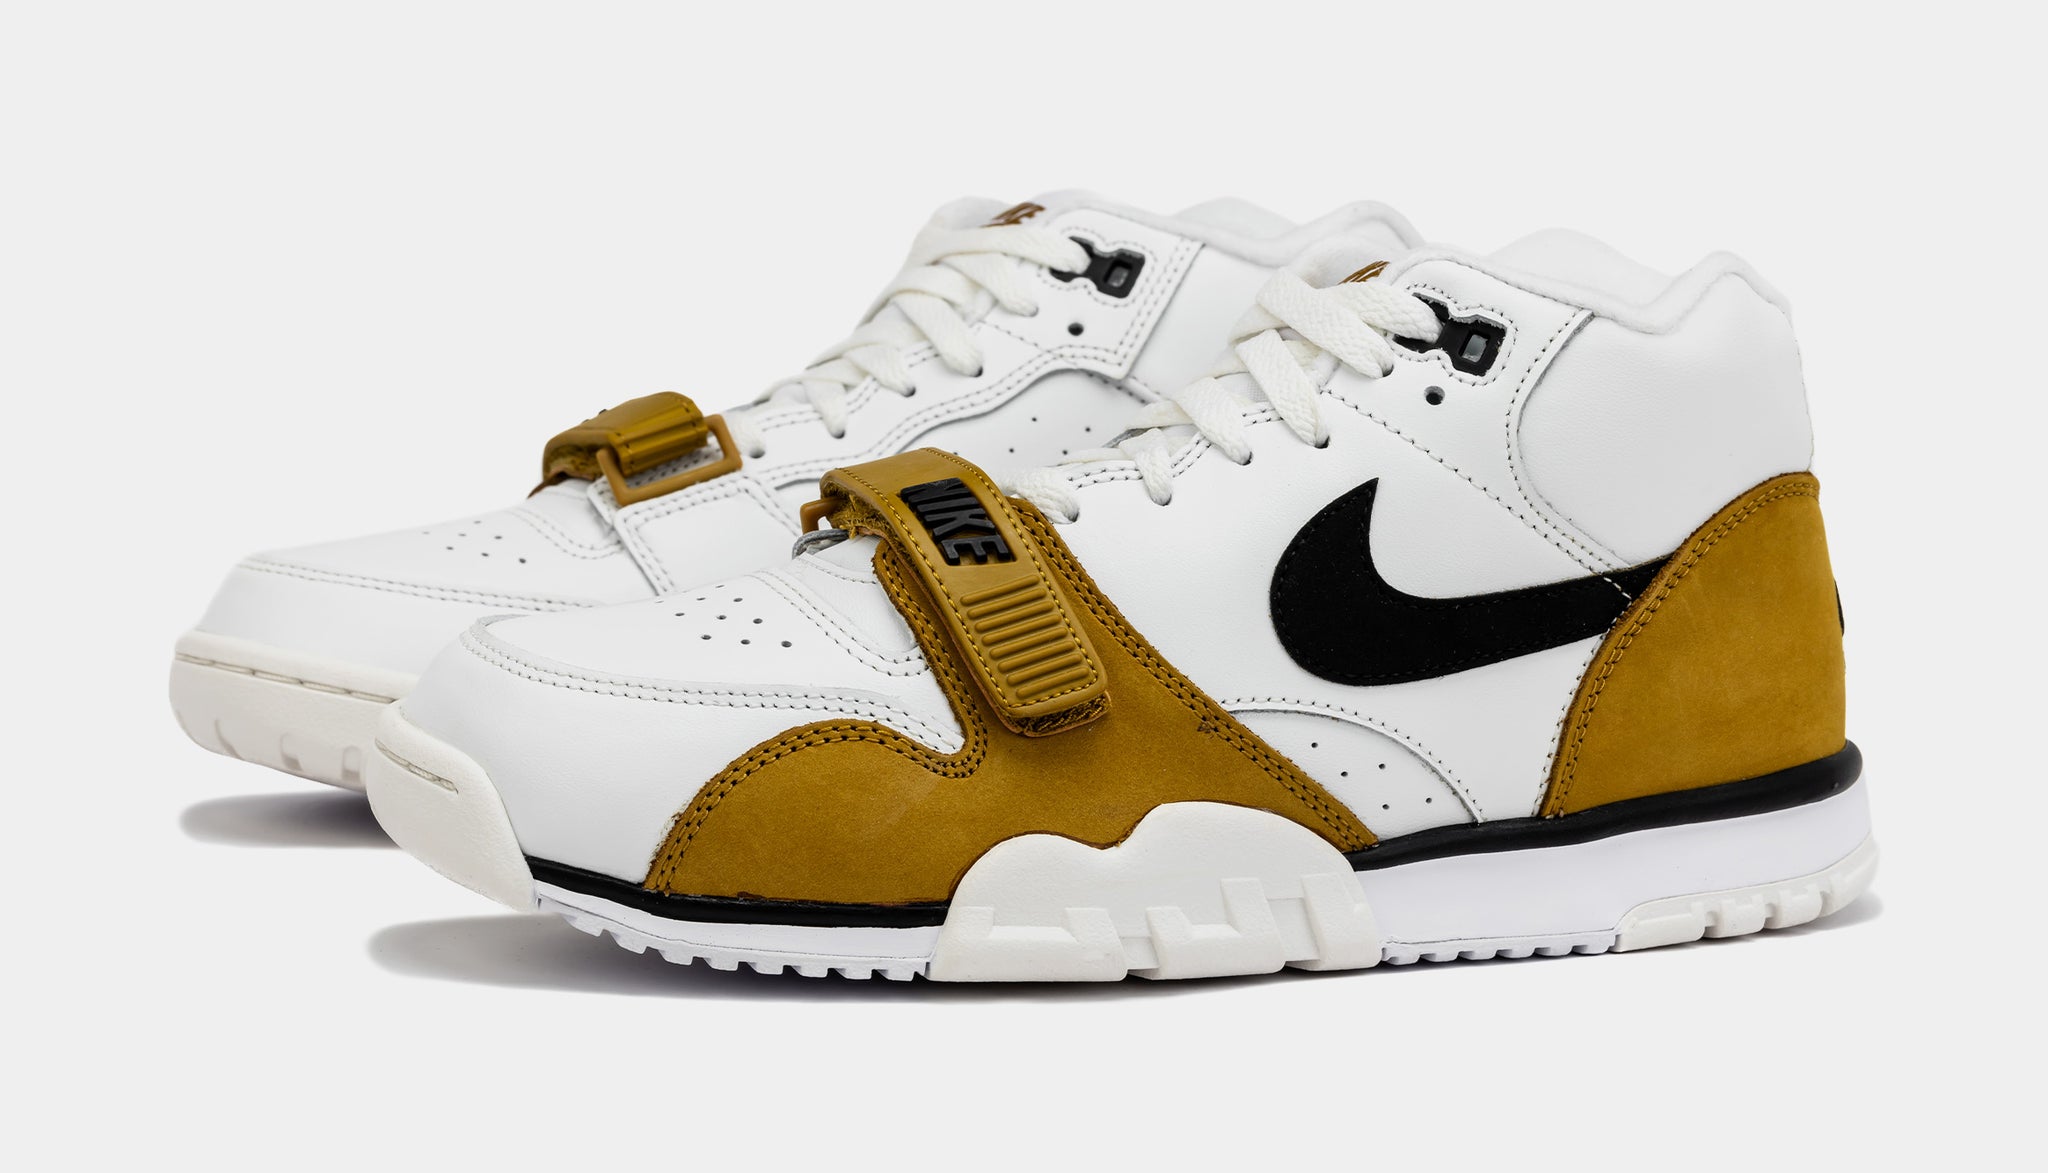 Nike Air Trainer 1 Men's Shoes